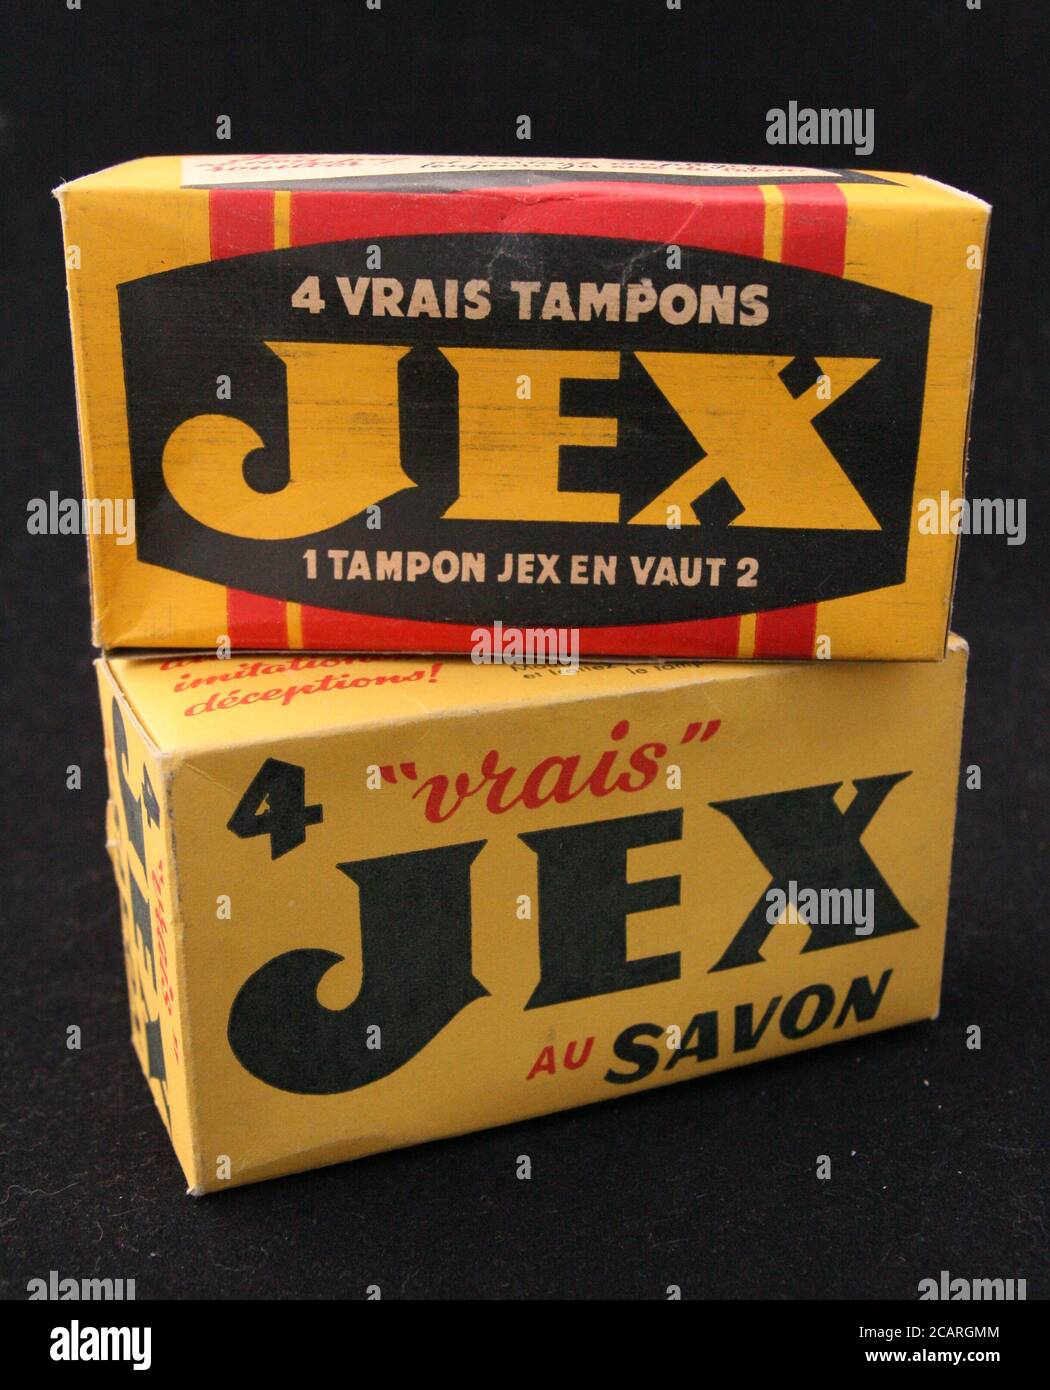 Tampon Jex High Resolution Stock Photography and Images - Alamy